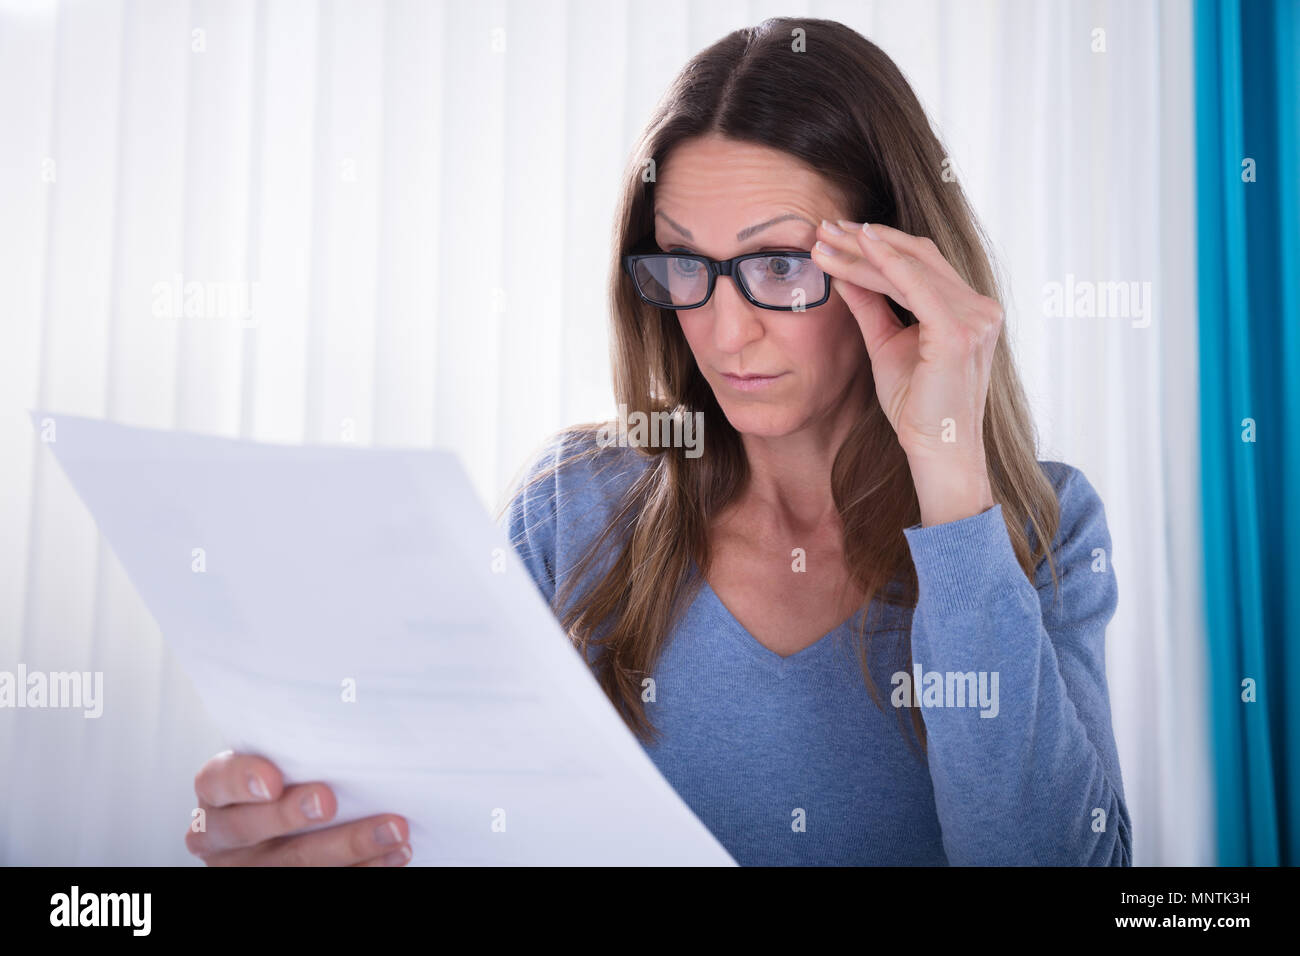 Close-up Of Mature Woman Wearing Eyeglasses Looking At Document Stock Photo